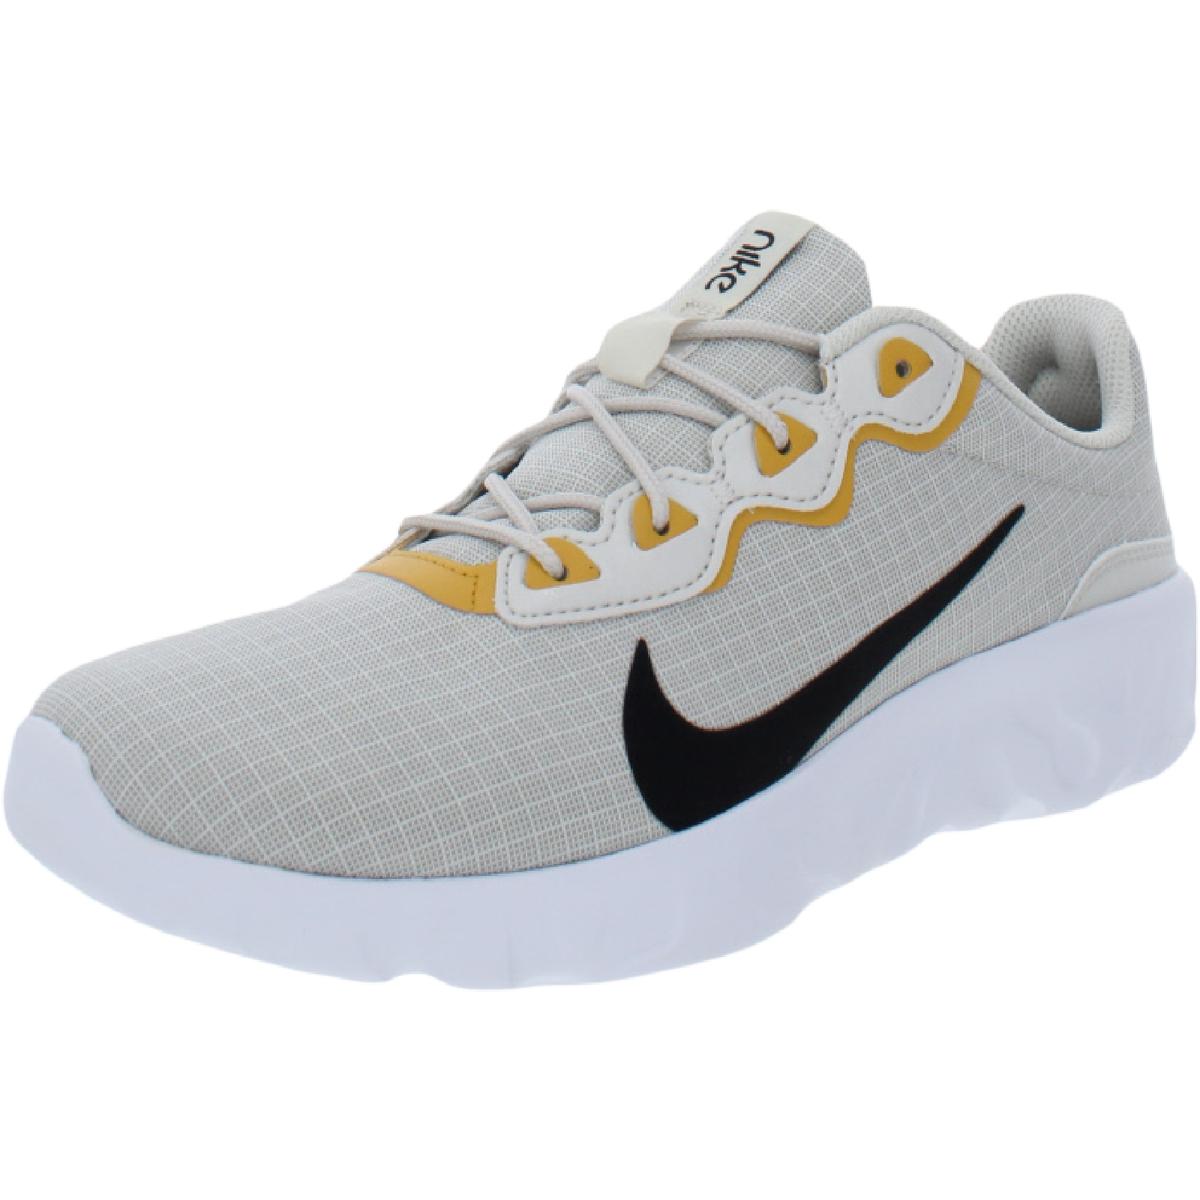 Normalization cancer Drought Nike Explore Strada Mens Fitness Performance Running Shoes